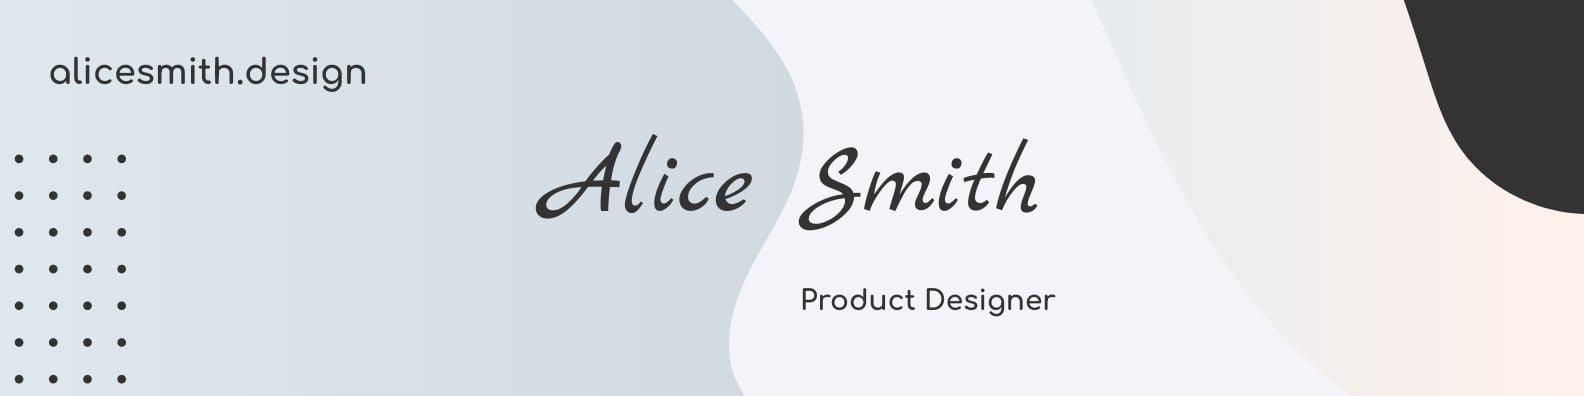 LinkedIn Banner & Cover 90 template. Quickly edit fonts, text, colors, and more for free.